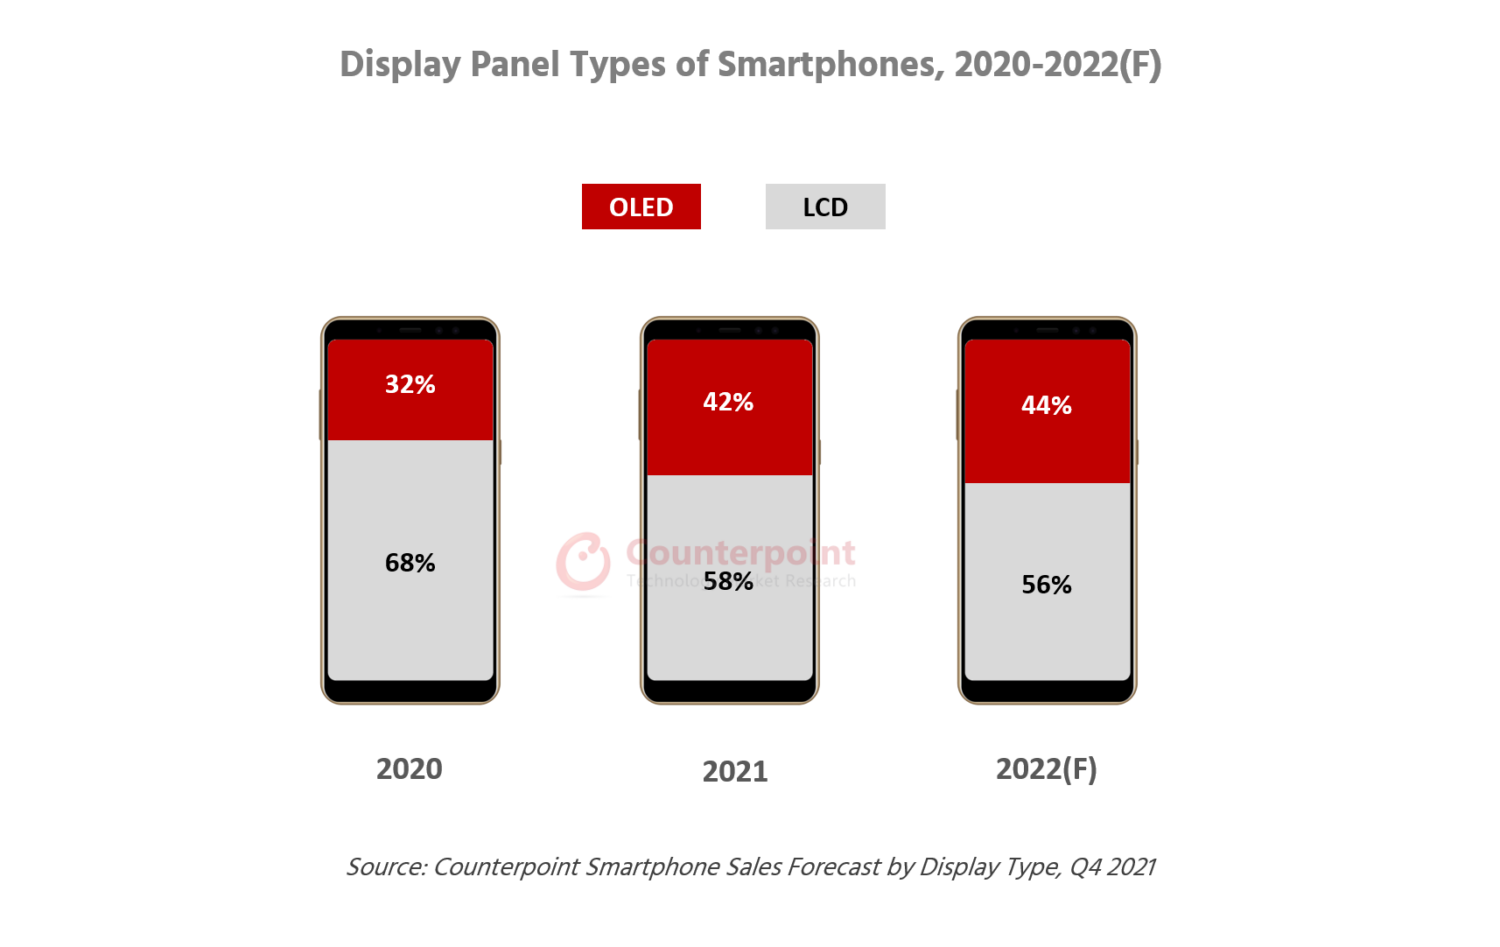 counterpoint research Display Panel Types of Smartphones, 2020-2022(F)